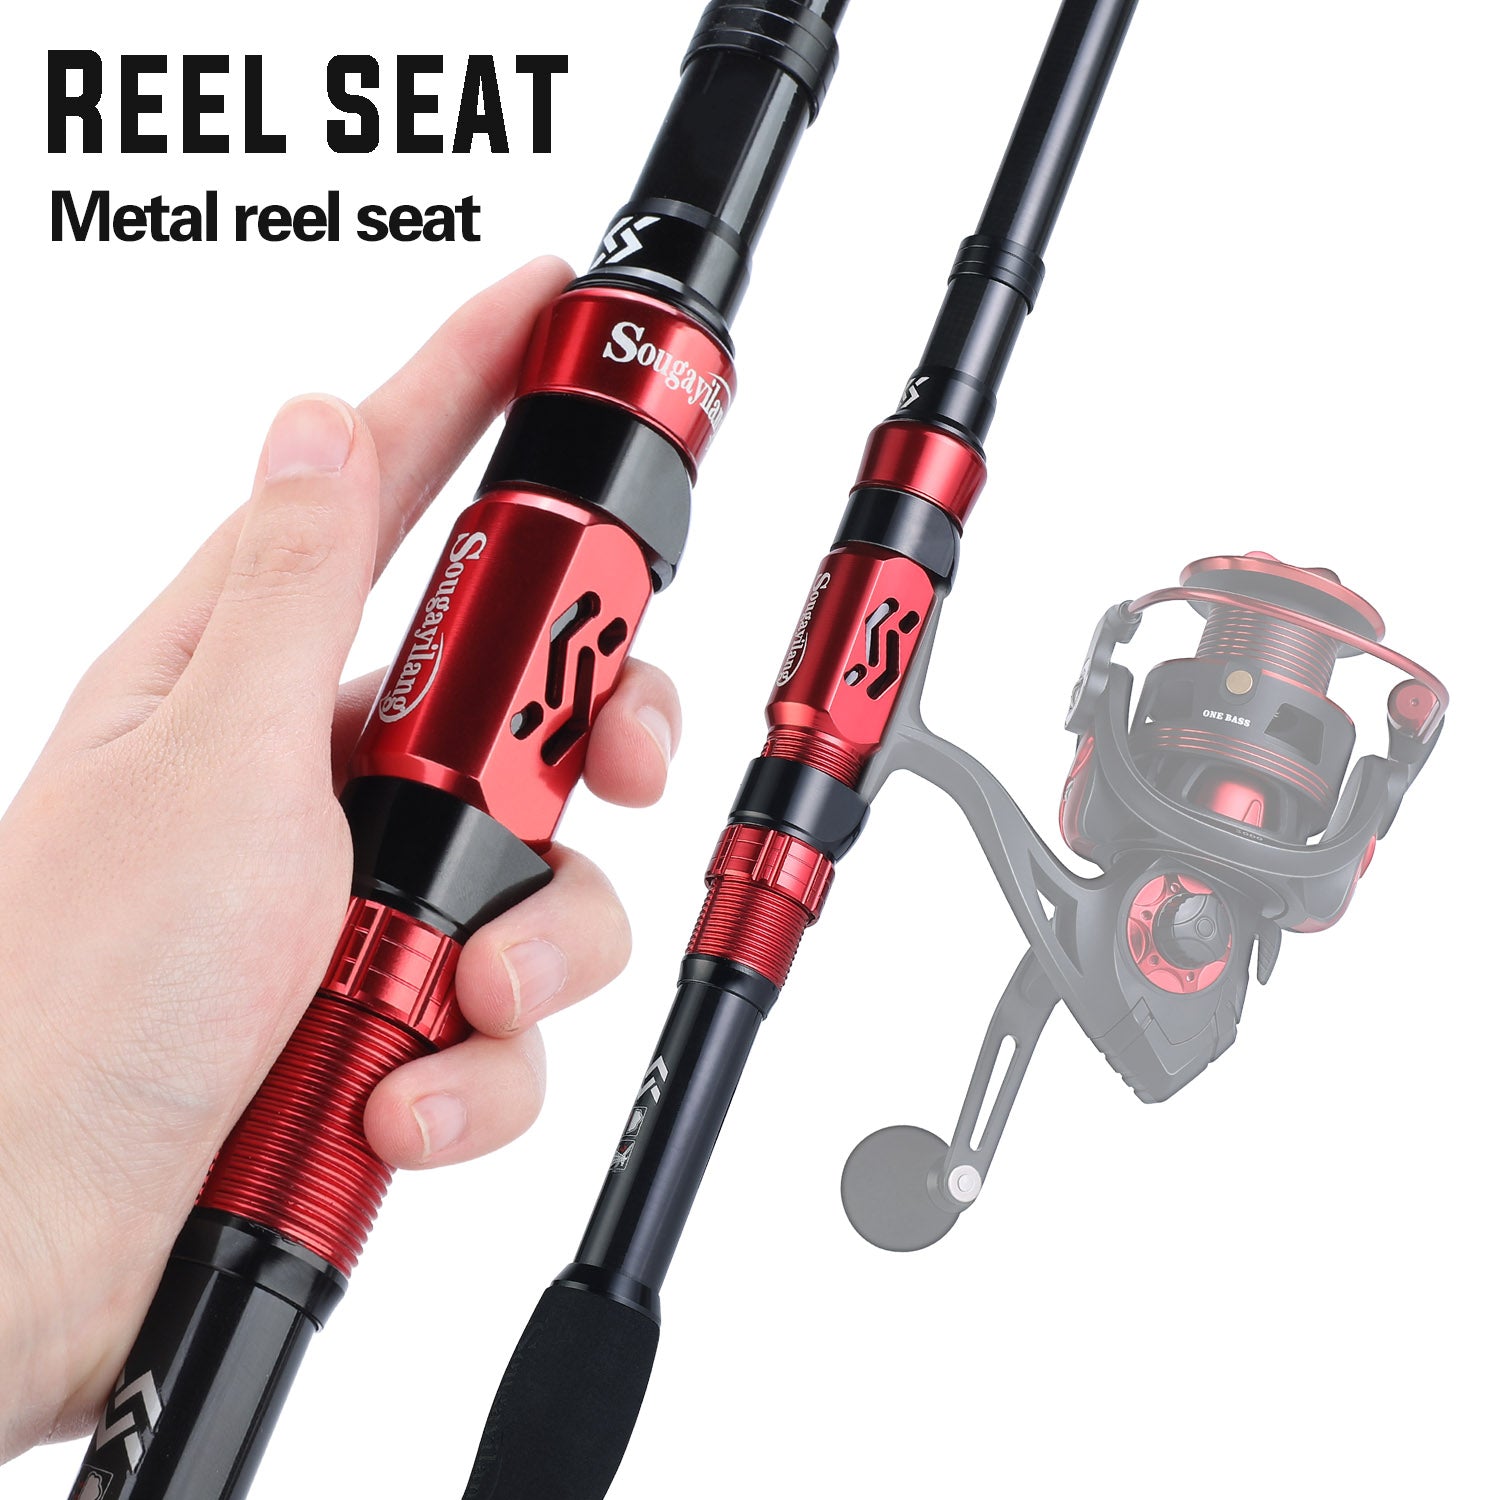 NEW 1.8m-2.7m red beginner Rod Reel Combos Portable telescopic carbon  Casting Rod Baitcasting Reel set Northern Pike fish pole - AliExpress